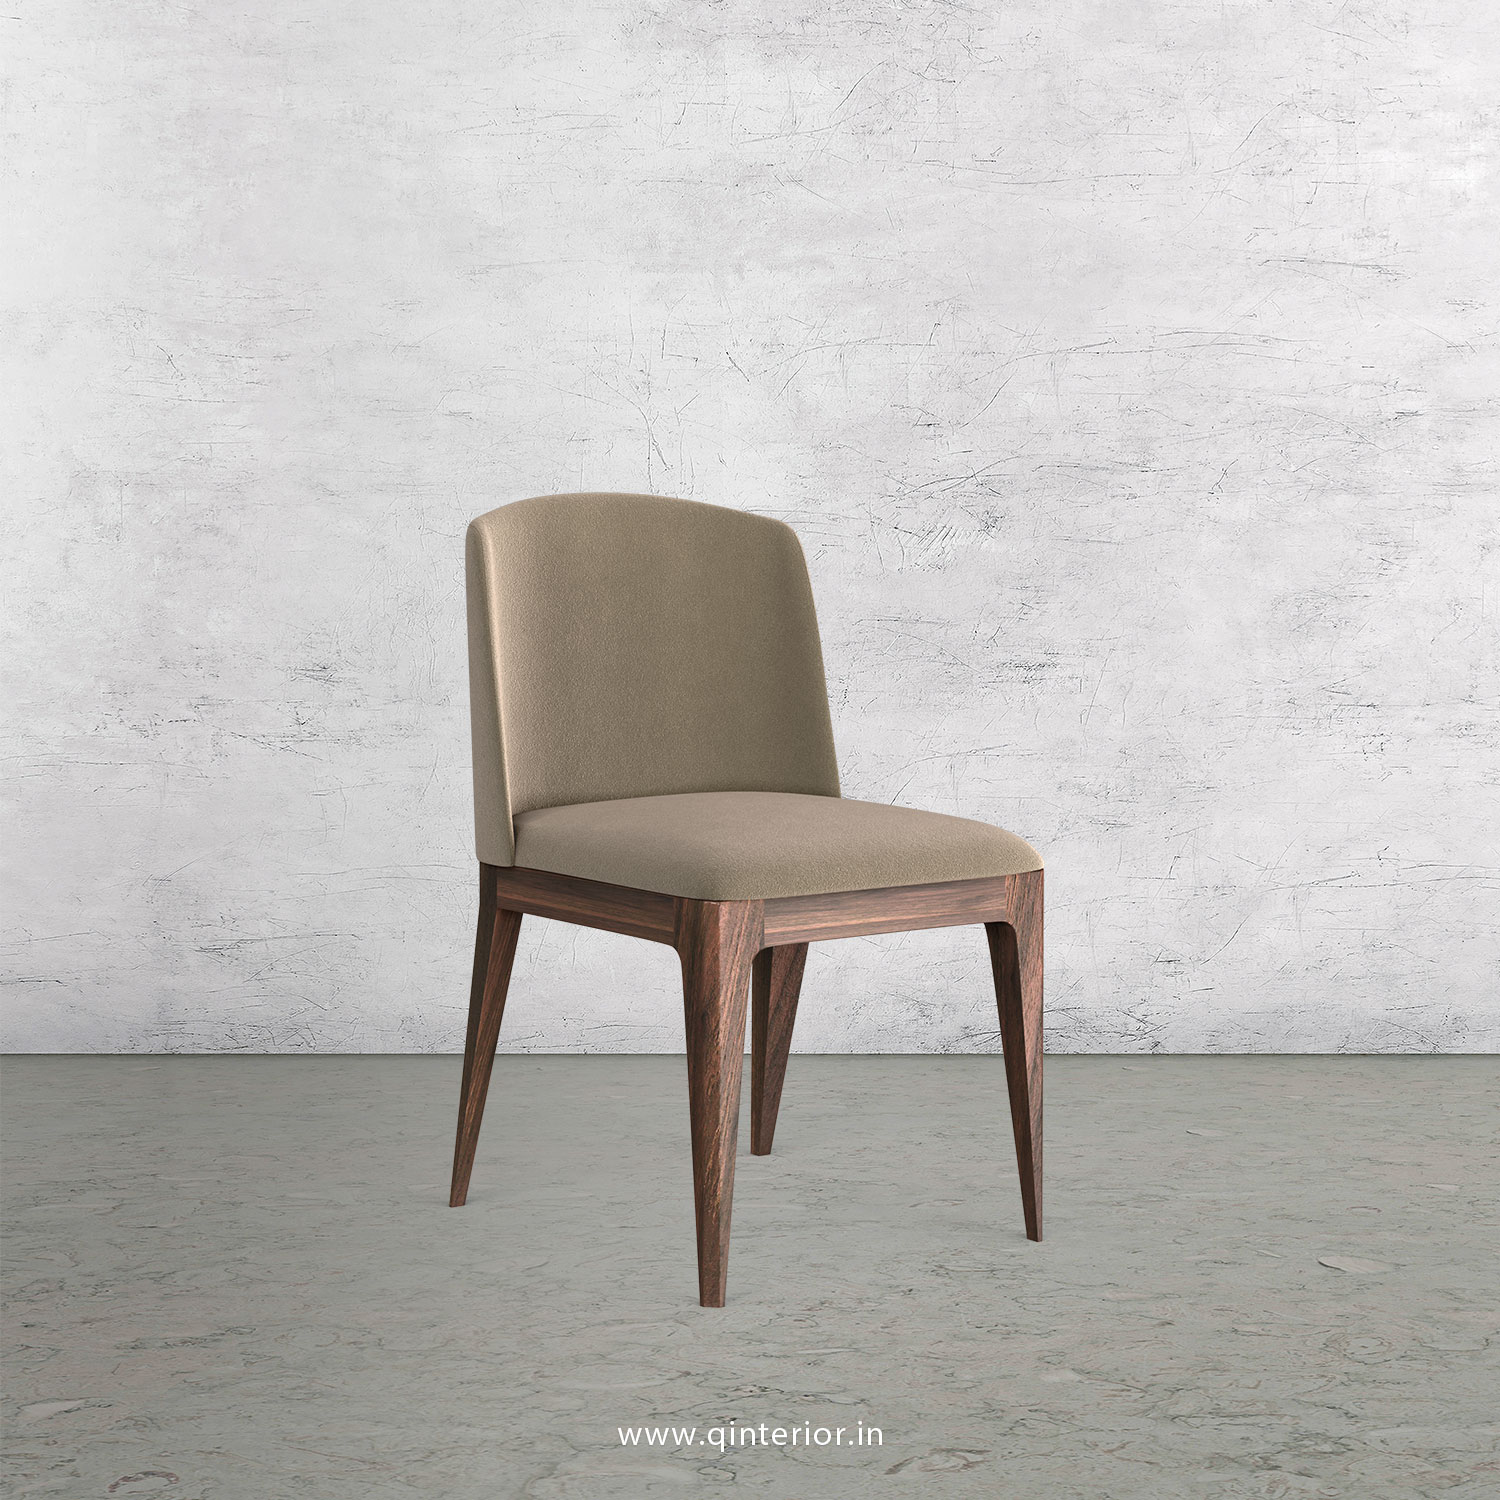 Cario Dining Chair in Velvet Fabric - DCH001 VL12